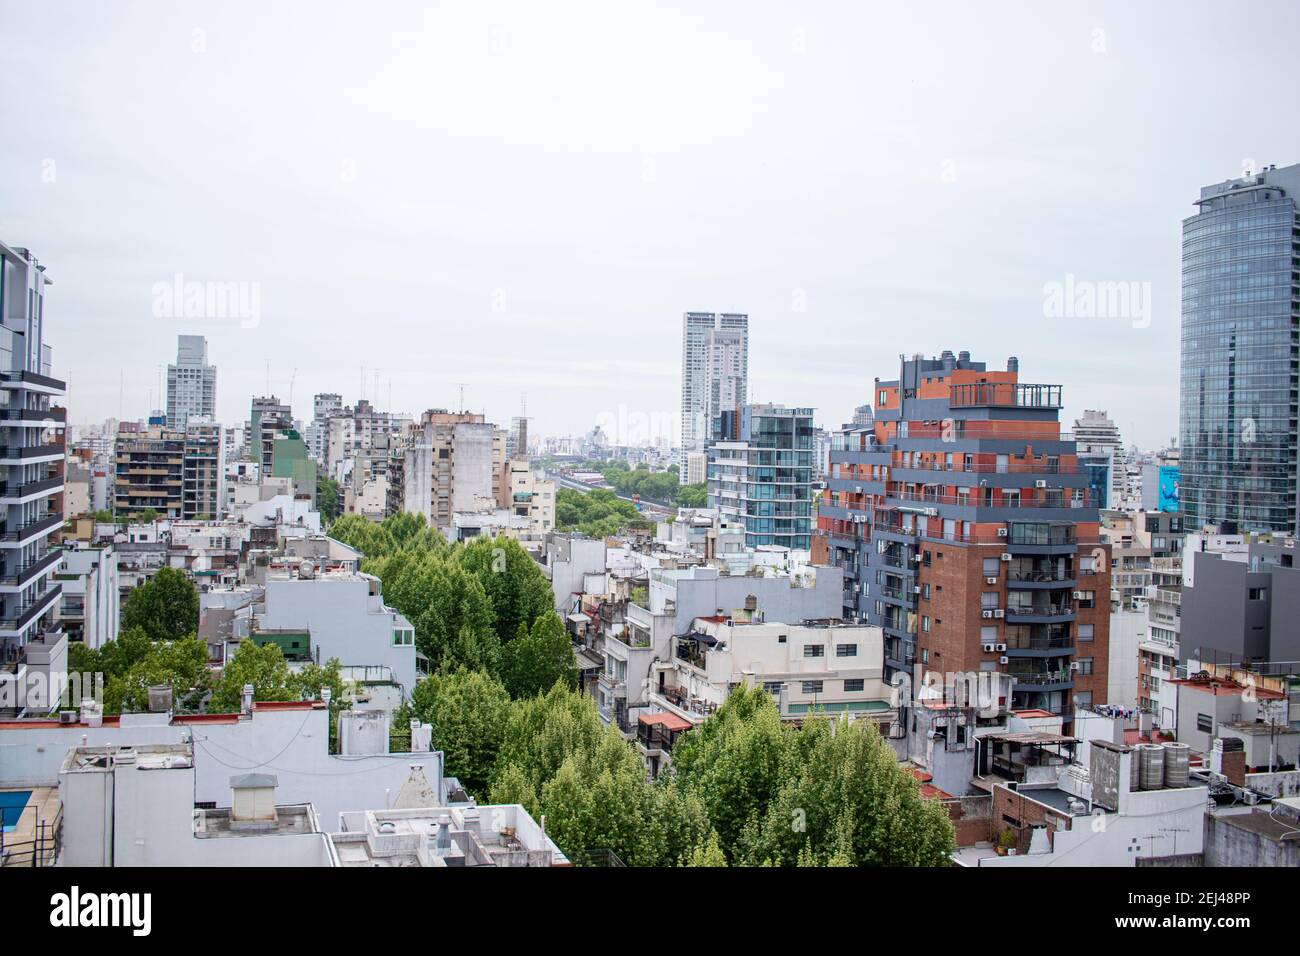 BUENOS AIRES - 15TH OCT 2019: View of the Palermo area in the city of Buenos Aires in Argentina Stock Photo